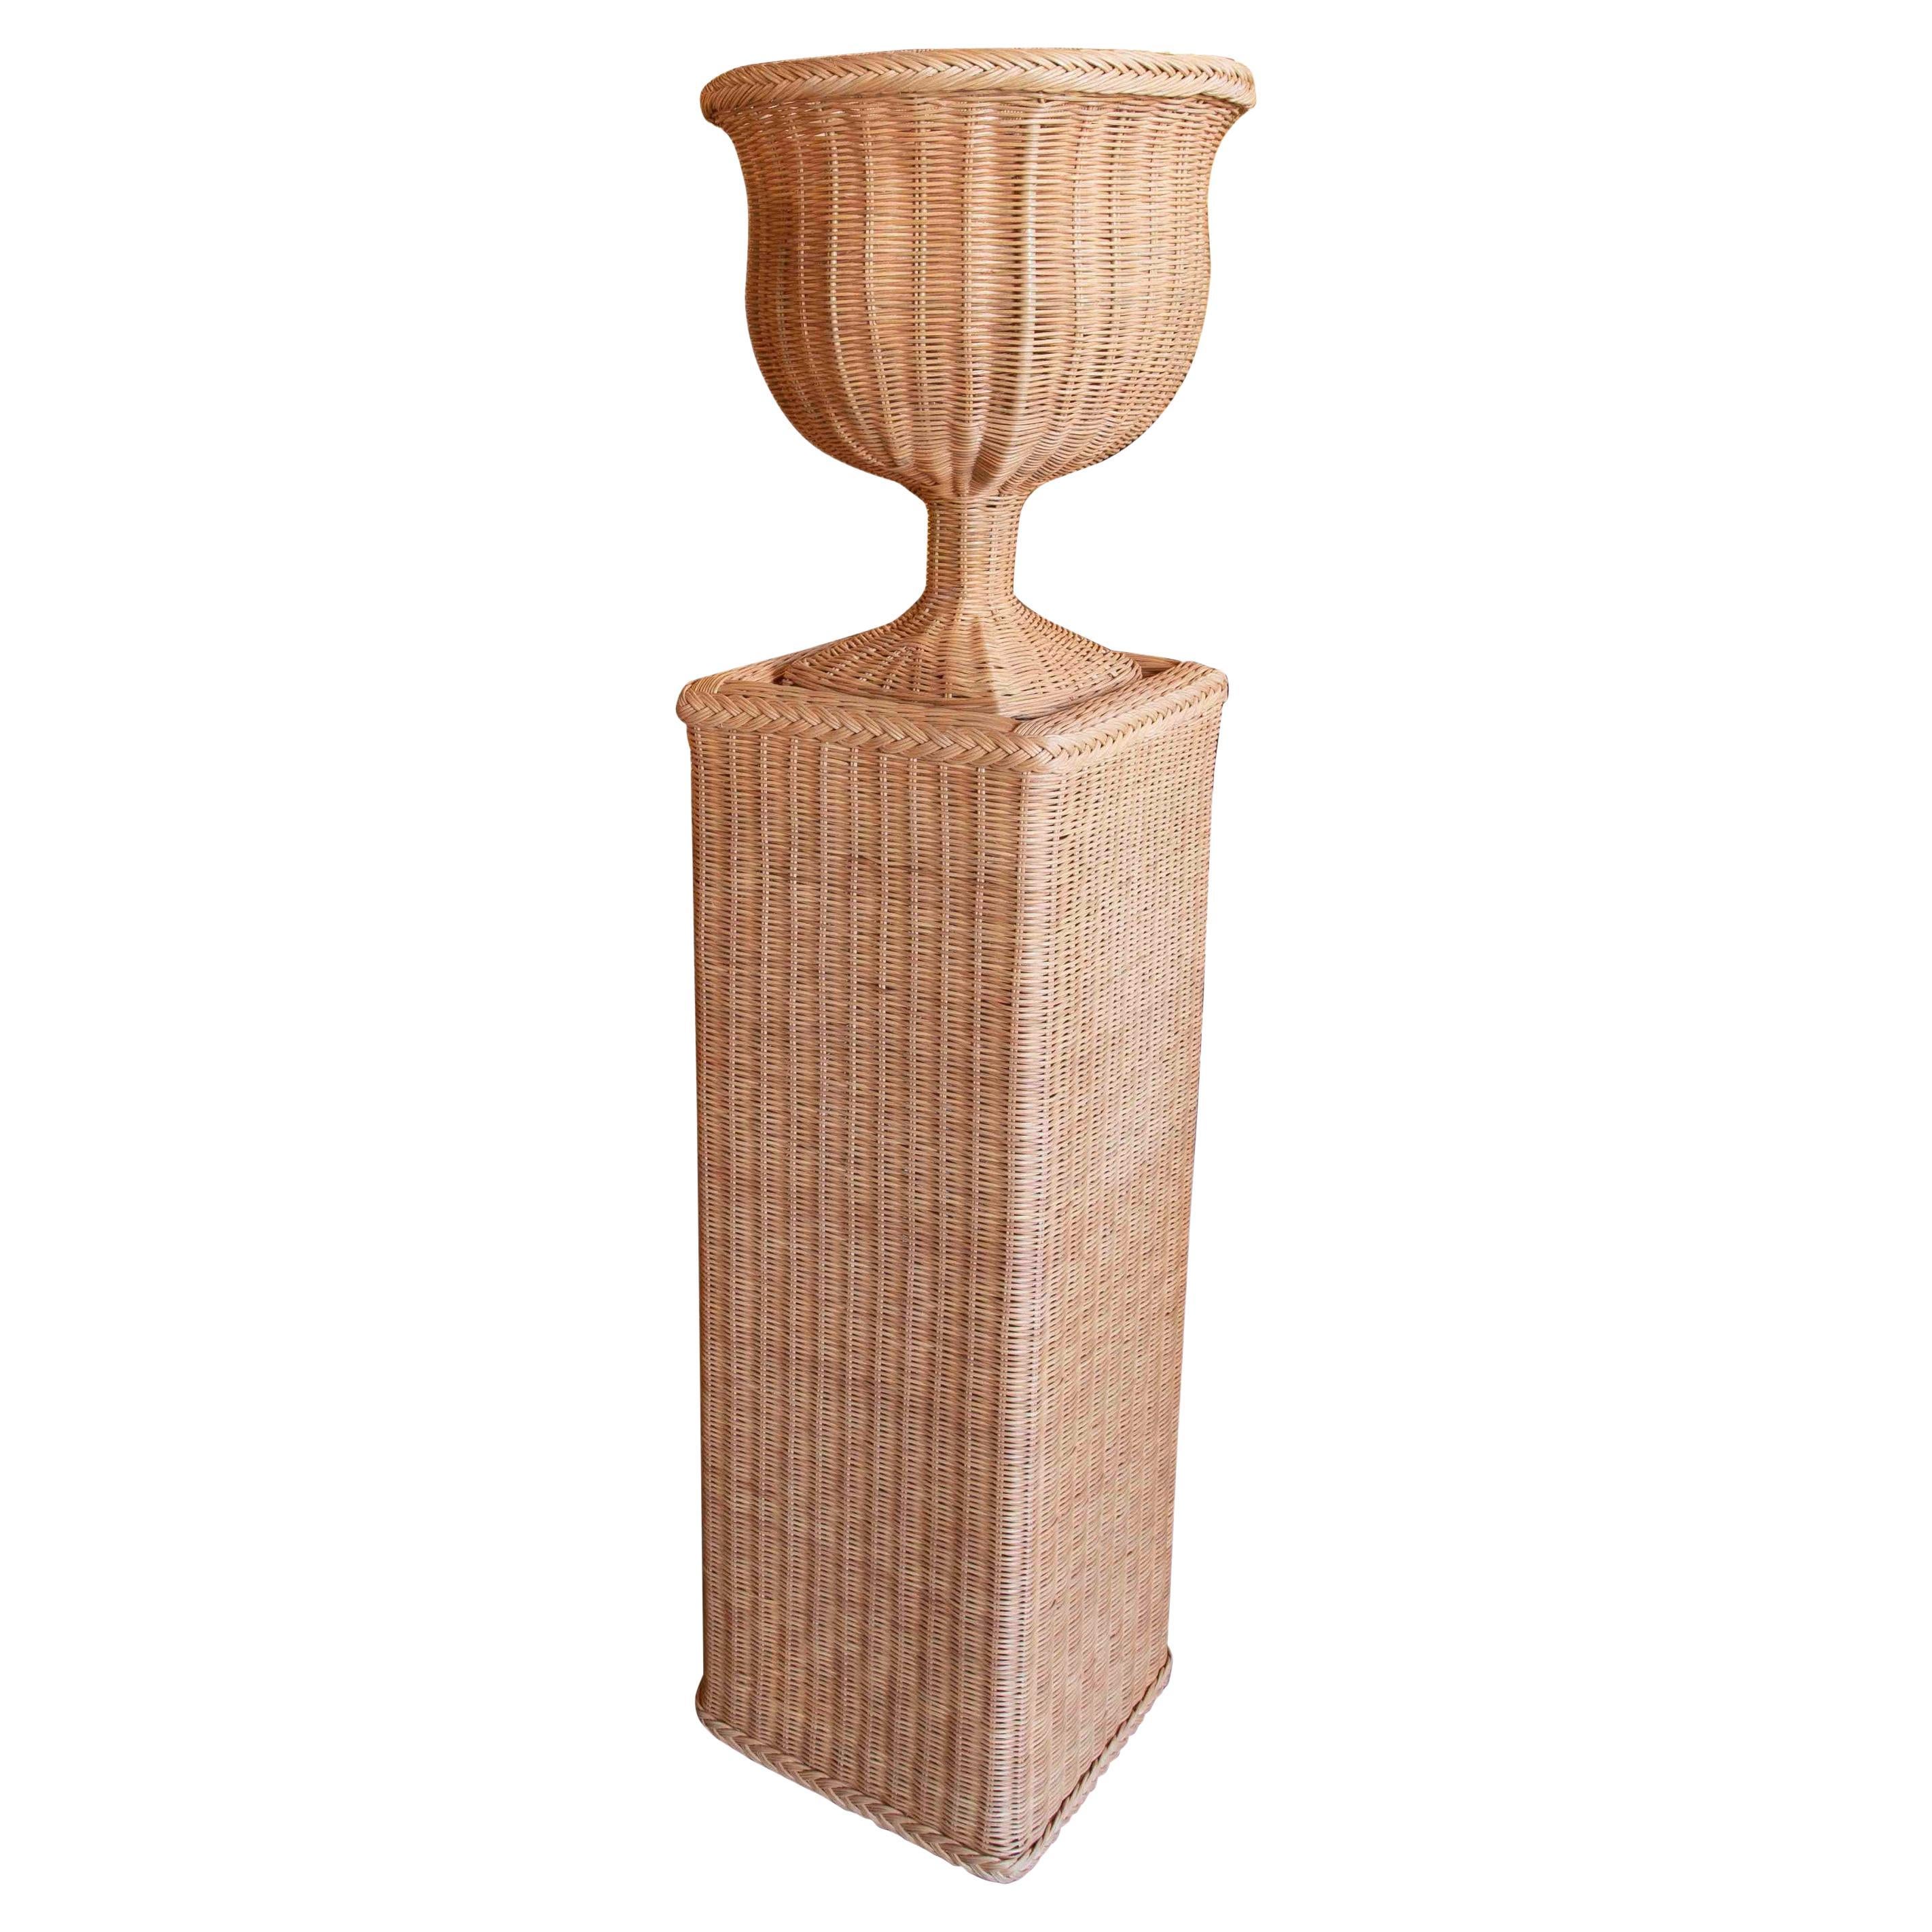 Handmade Wicker Urns with Rectangular Base and Iron Structure For Sale